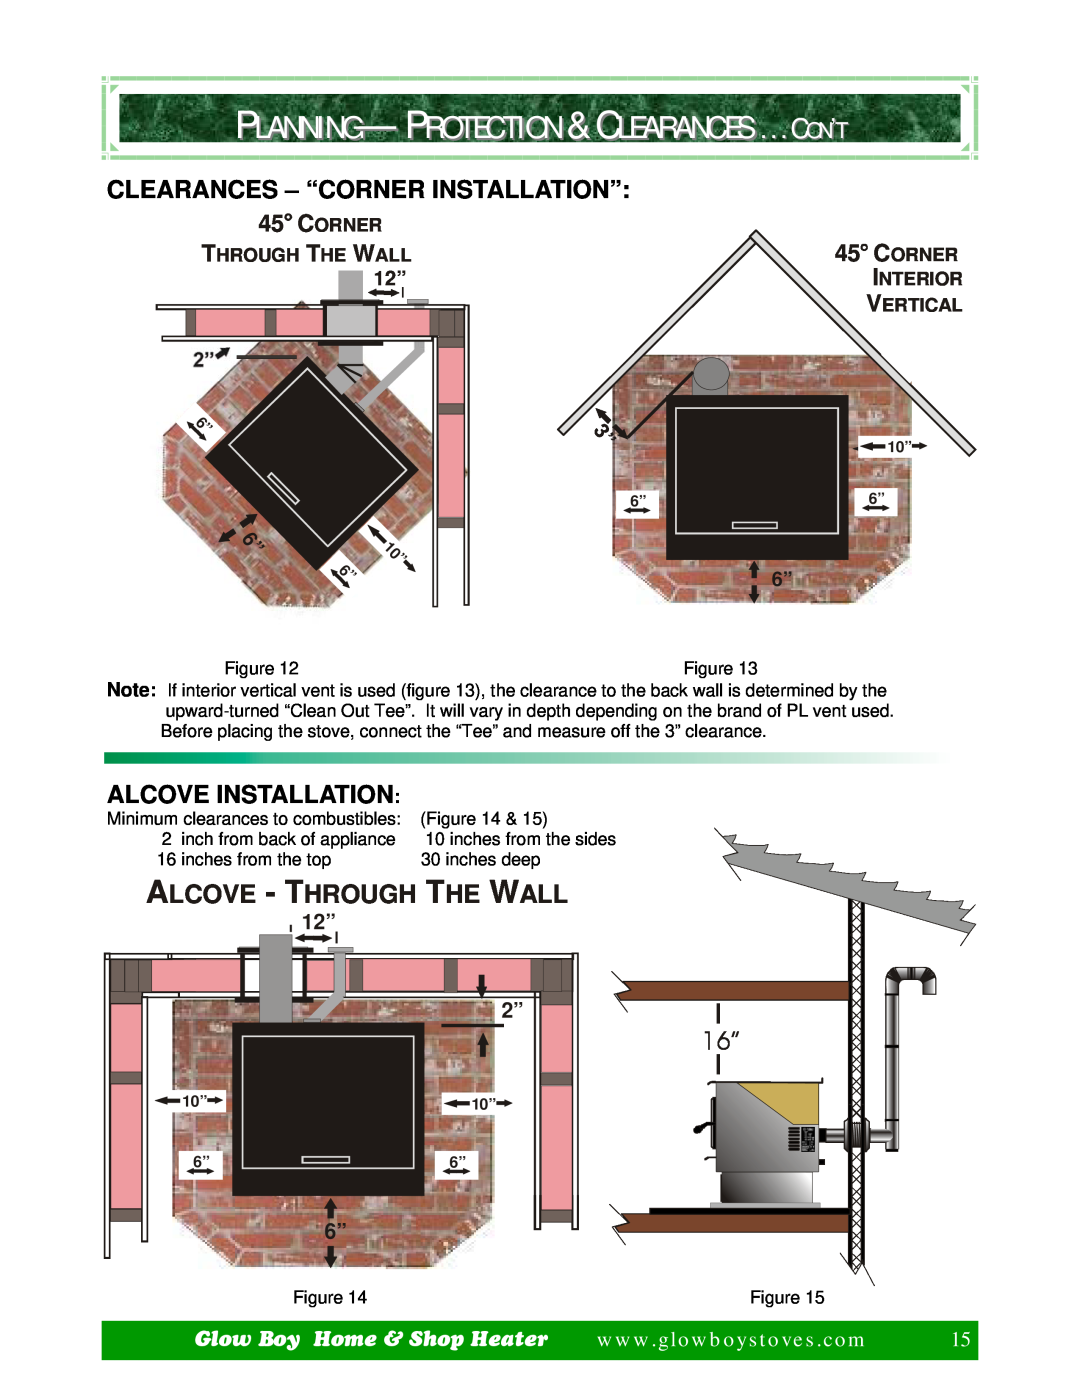 Dansons Group CCGB 1 manual Planning- Protection & Clearances . . . Con’T, Clearances - “Corner Installation”, 1” 2”, 6” 6” 